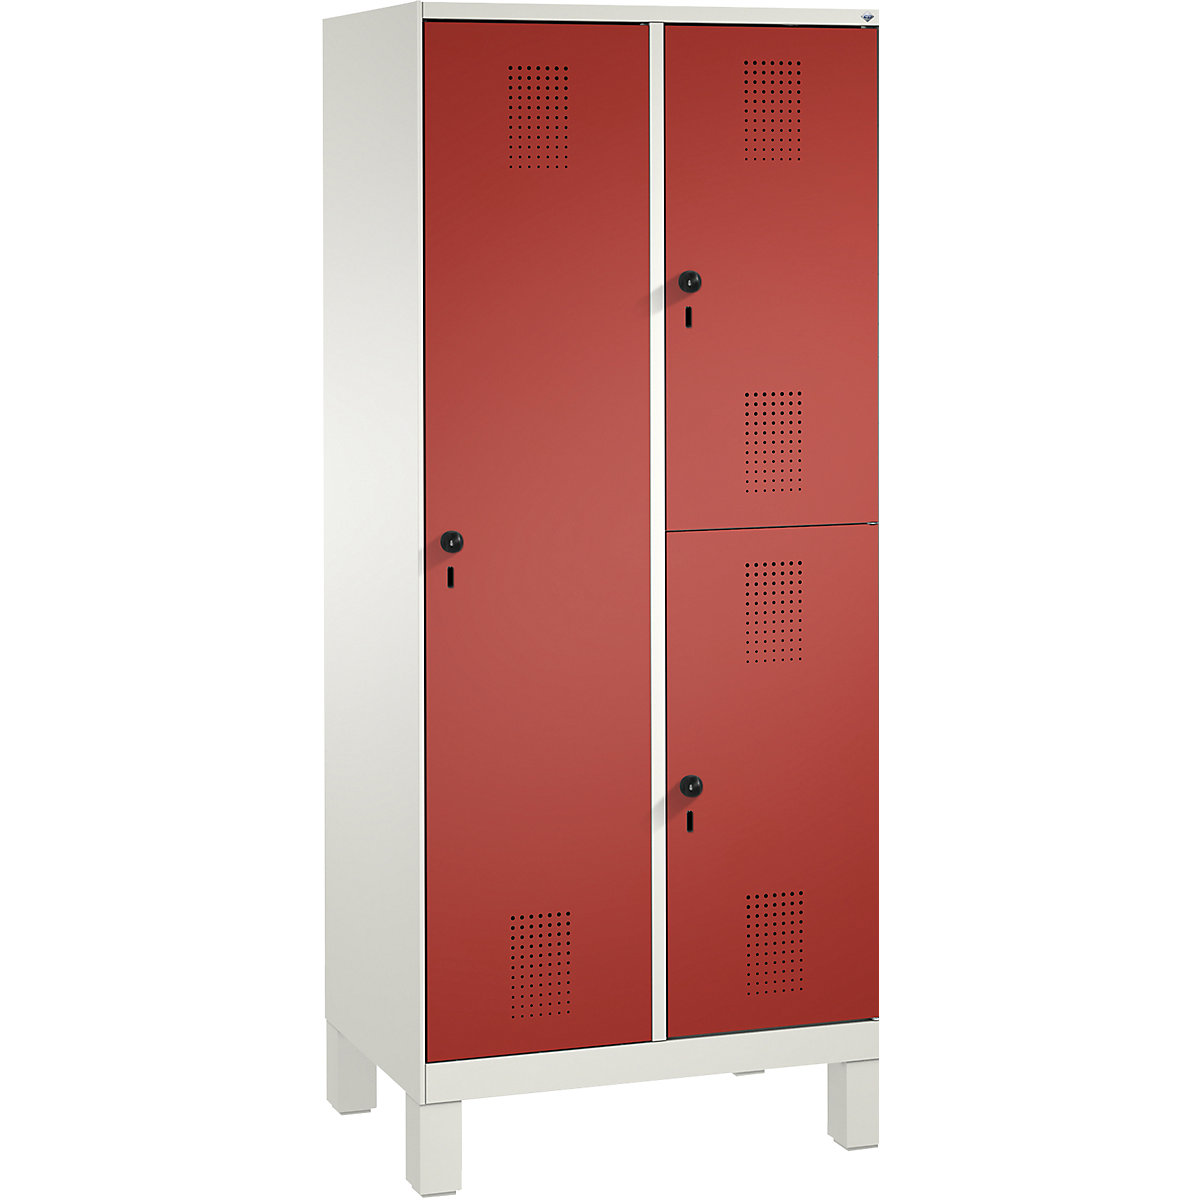 EVOLO combination cupboard, single and double tier – C+P, 2 compartments, 3 doors, compartment width 400 mm, with feet, traffic white / flame red